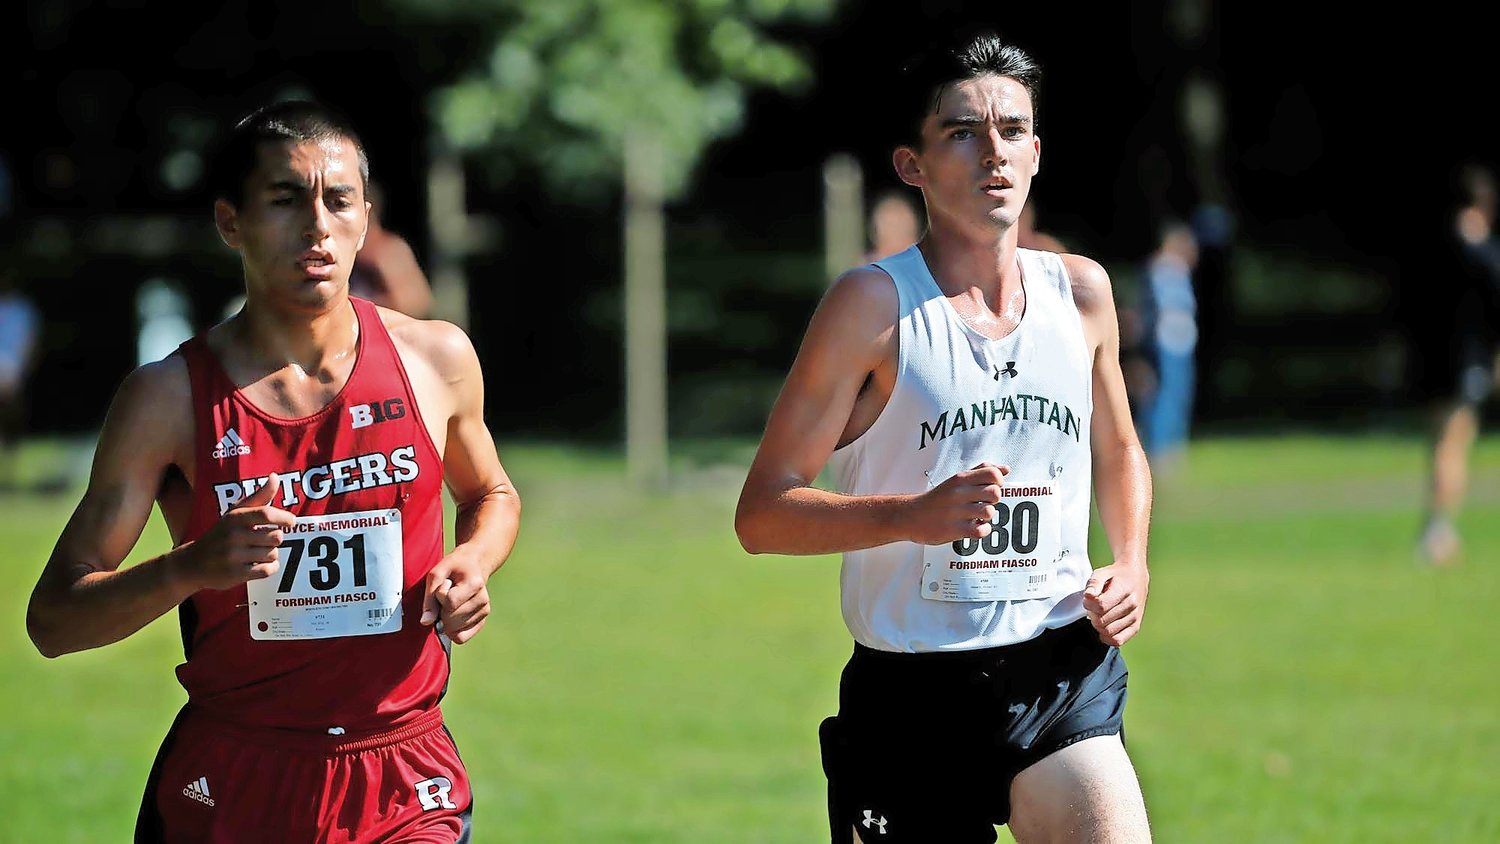 Michael Hennelly, right, is entering his fifth season for the Manhattan College cross-country team. For one weekend this summer, Hennelly traded Riverdale for Utica where he won the famed Boilermaker 5K.